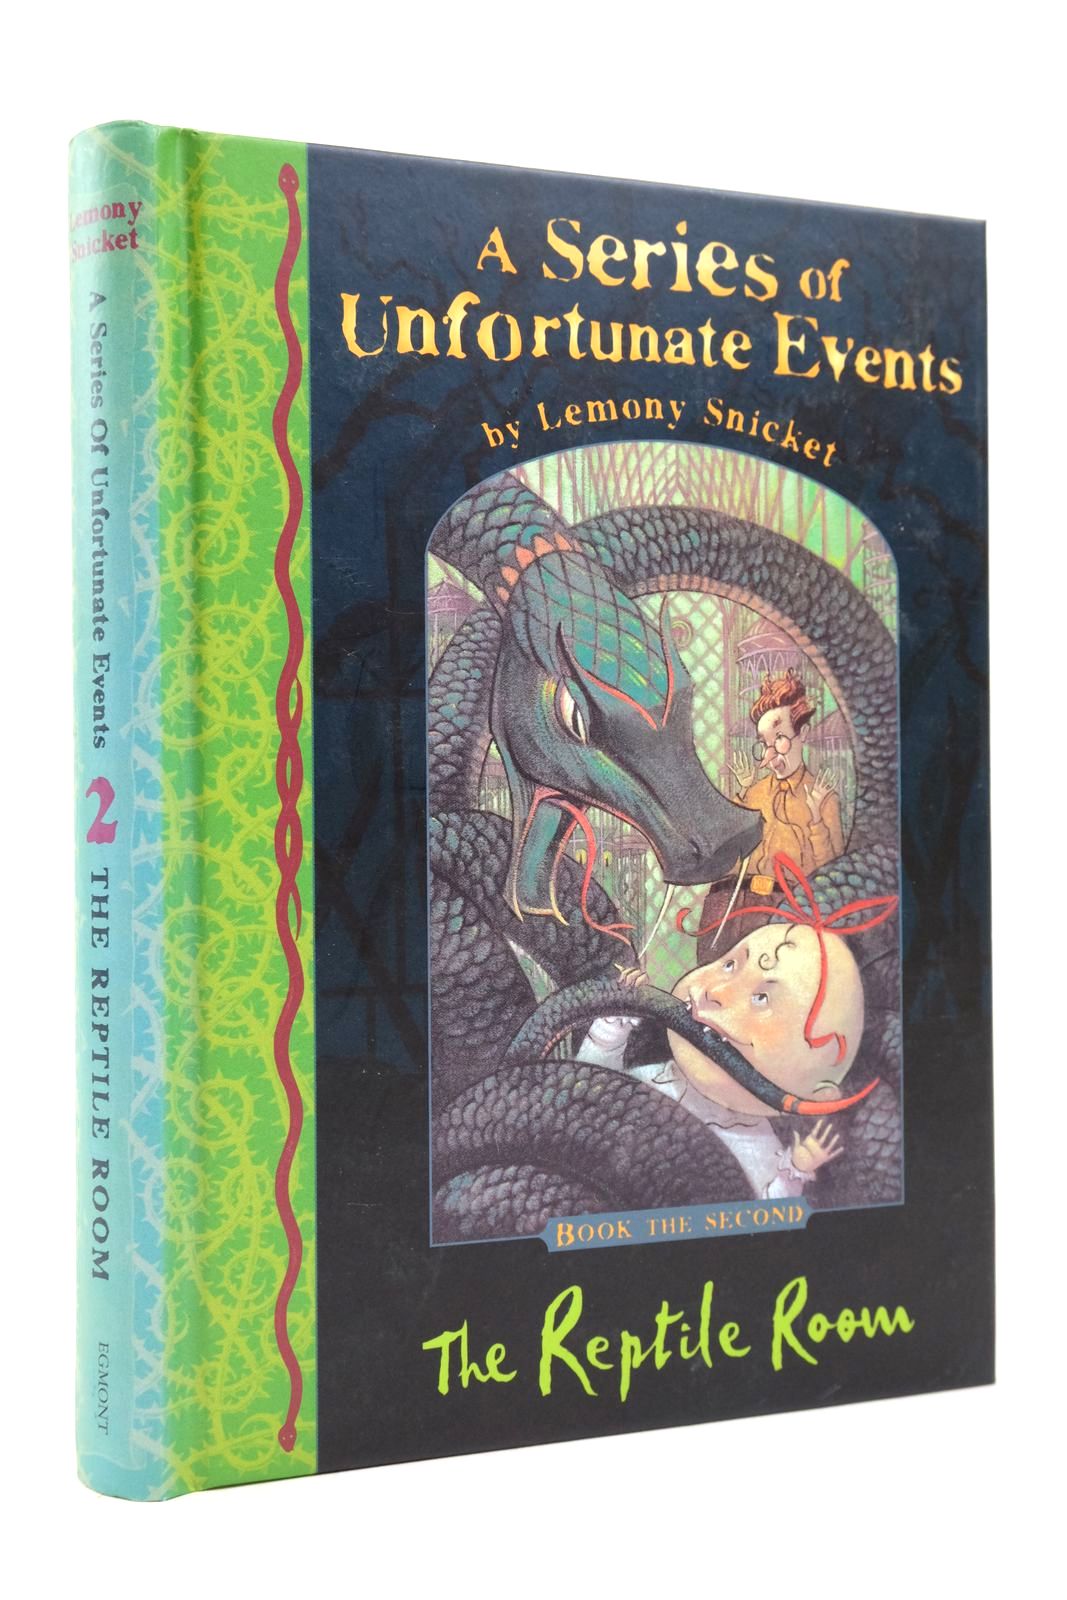 Photo of A SERIES OF UNFORTUNATE EVENTS: THE REPTILE ROOM written by Snicket, Lemony illustrated by Helquist, Brett published by Egmont Books Ltd. (STOCK CODE: 2139529)  for sale by Stella & Rose's Books